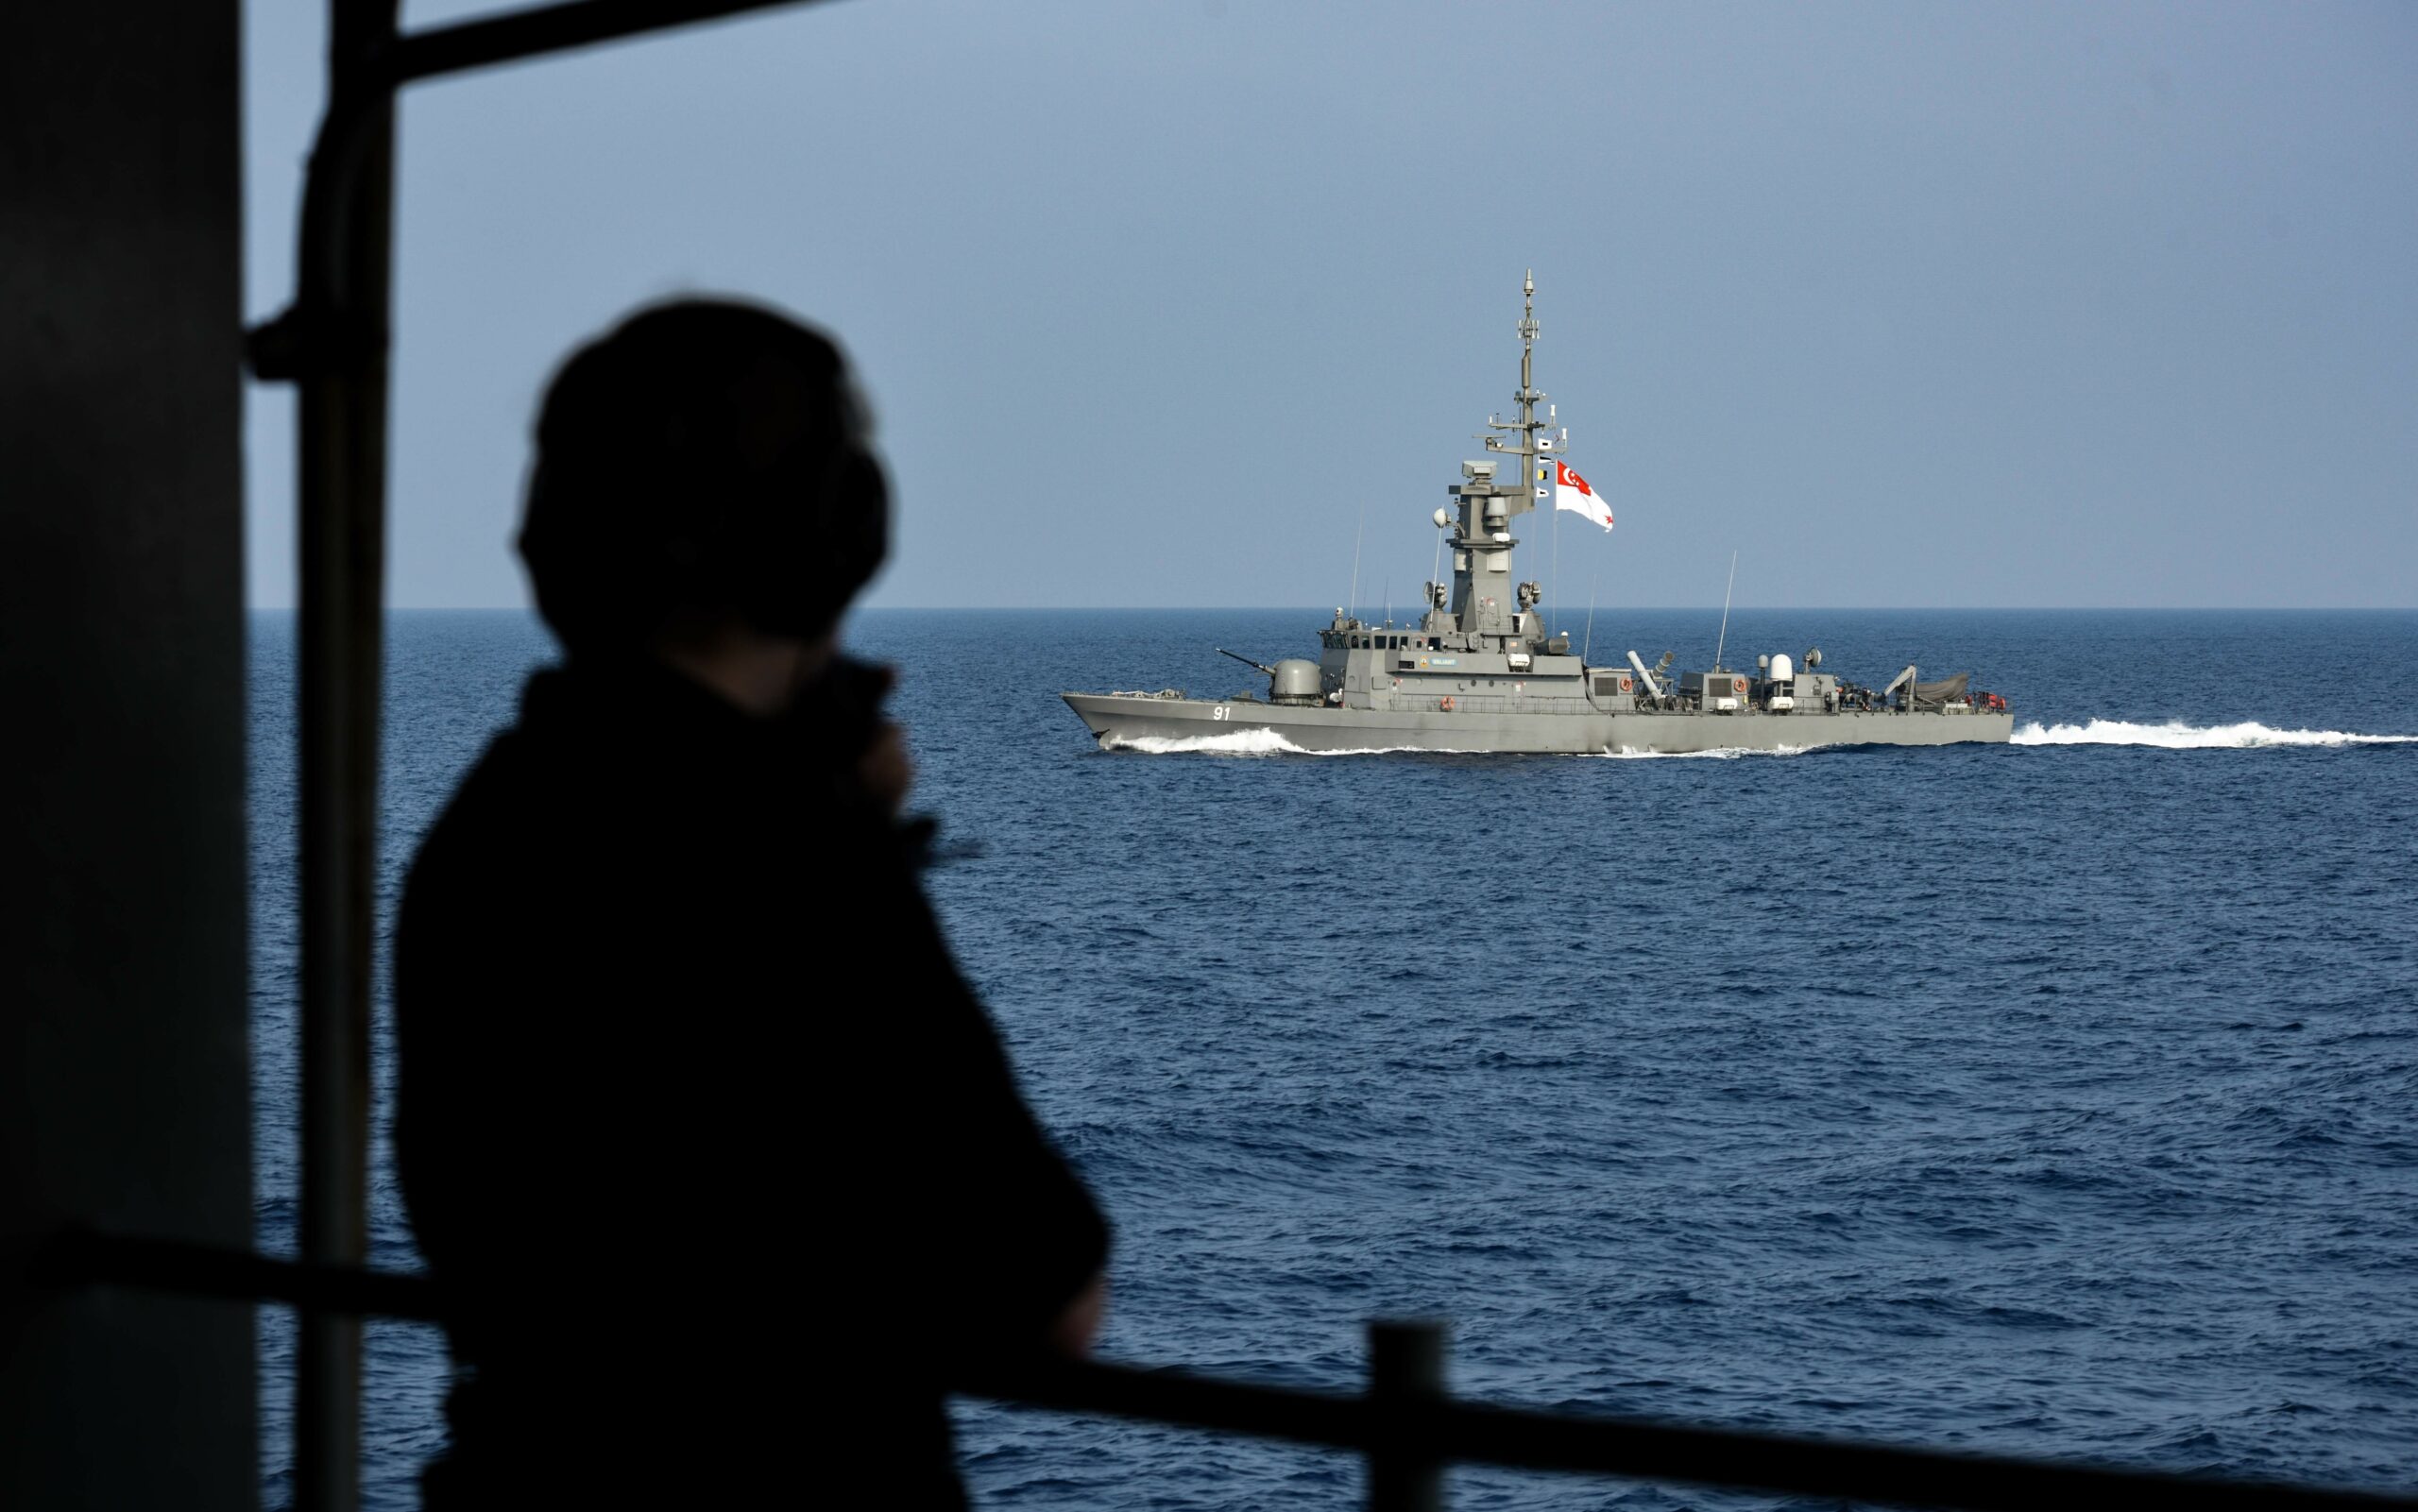 180406-N-GP724-2430 SOUTH CHINA SEA (April 6, 2018) Seaman Yara Schmidt watches as the Republic of Singapore Navy Victory-class corvette RSS Valiant (PGG 91) sails alongside the aircraft carrier USS Theodore Roosevelt (CVN 71). Theodore Roosevelt is currently underway for a regularly scheduled deployment in the U.S. 7th Fleet area of operations in support of maritime security operations and theater security cooperation efforts. (U.S. Navy photo by Mass Communication Specialist 3rd Class Alex Perlman/Released)